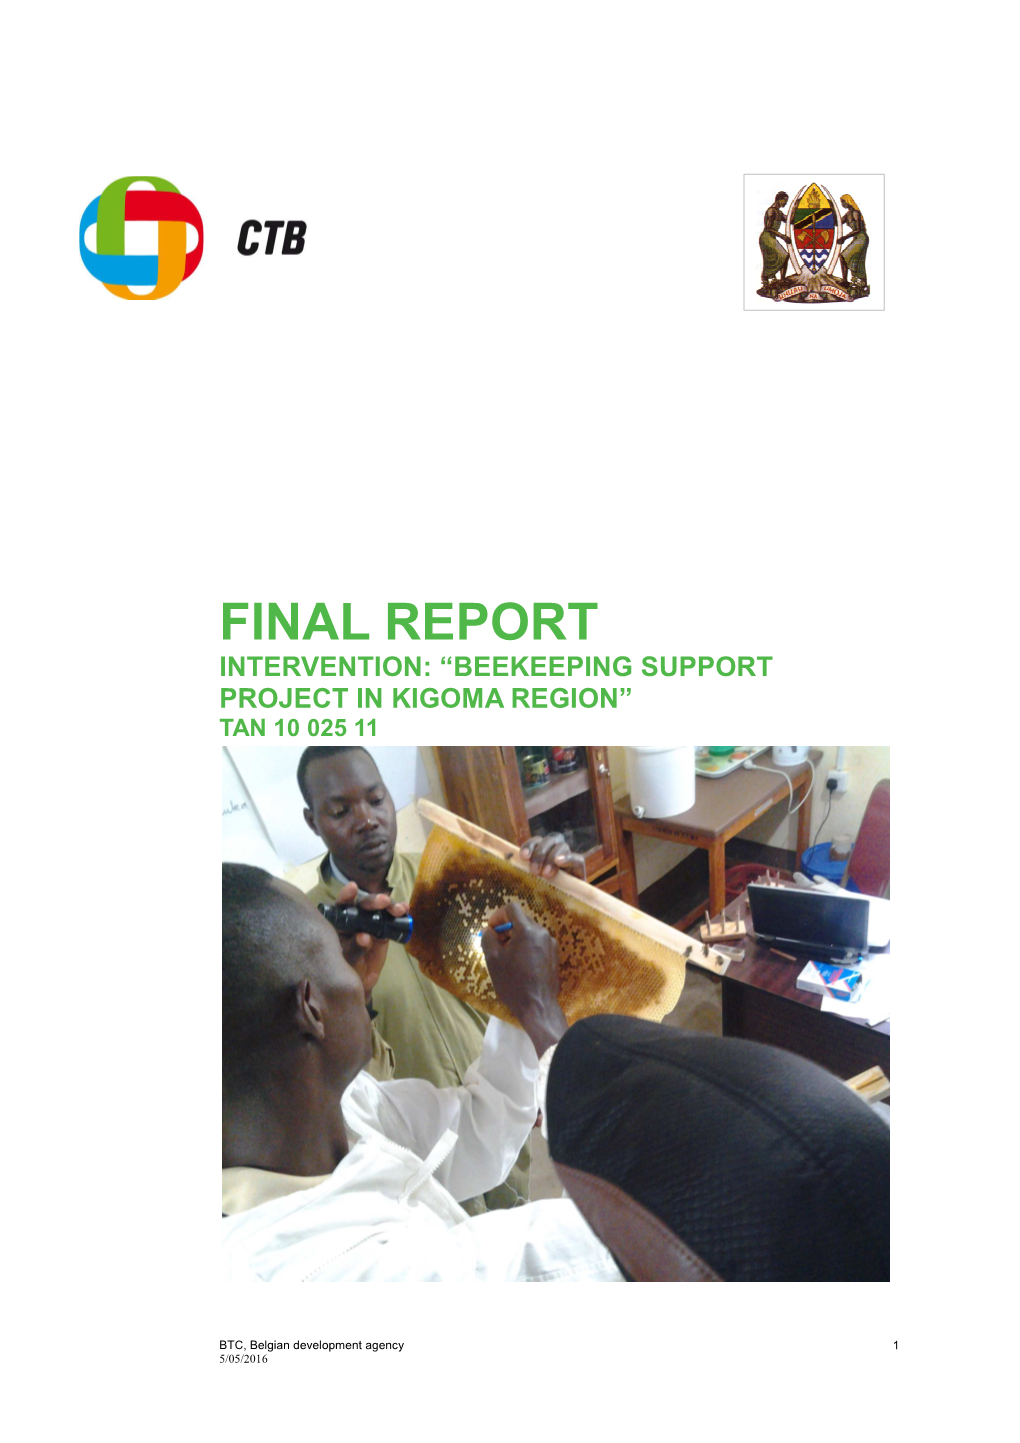 Final Report Intervention: “Beekeeping Support Project in Kigoma Region” Tan 10 025 11